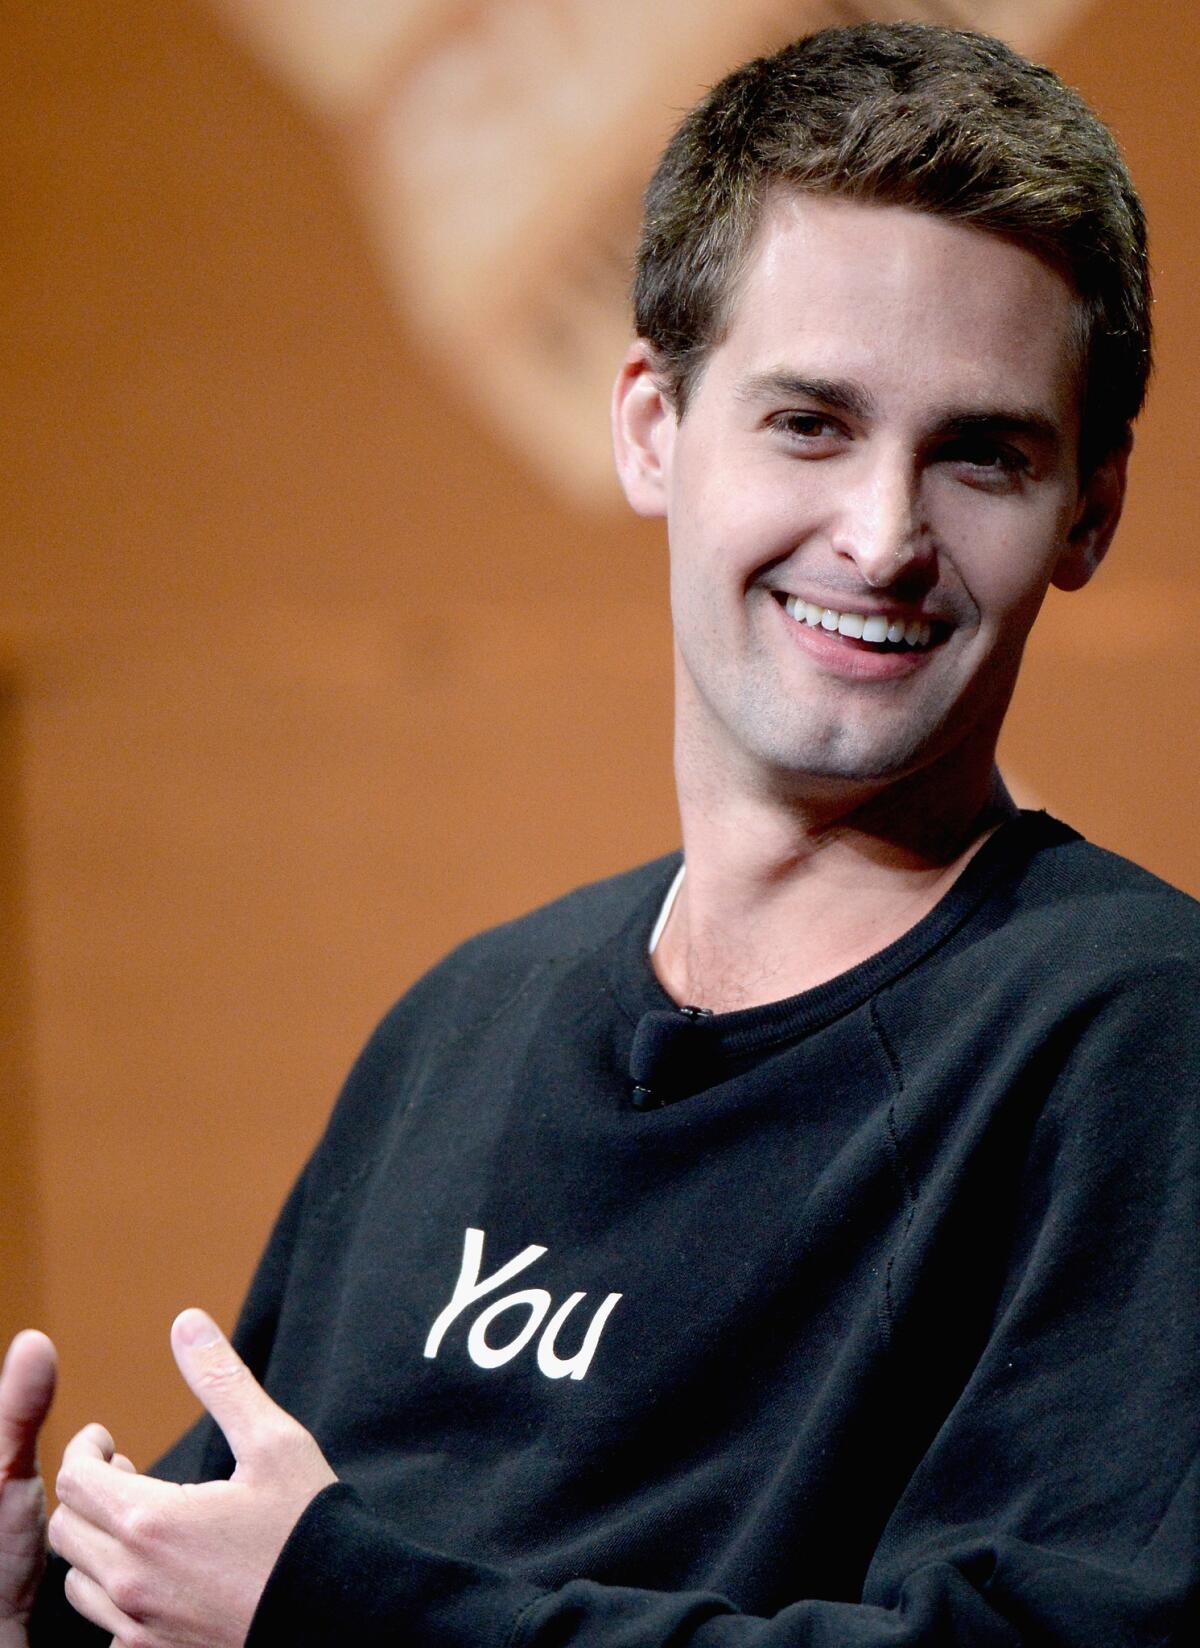 Snapchat Chief Executive Evan Spiegel speaks during "Disrupting Information and Communication" at the Vanity Fair New Establishment Summit at Yerba Buena Center for the Arts Oct. 8 in San Francisco